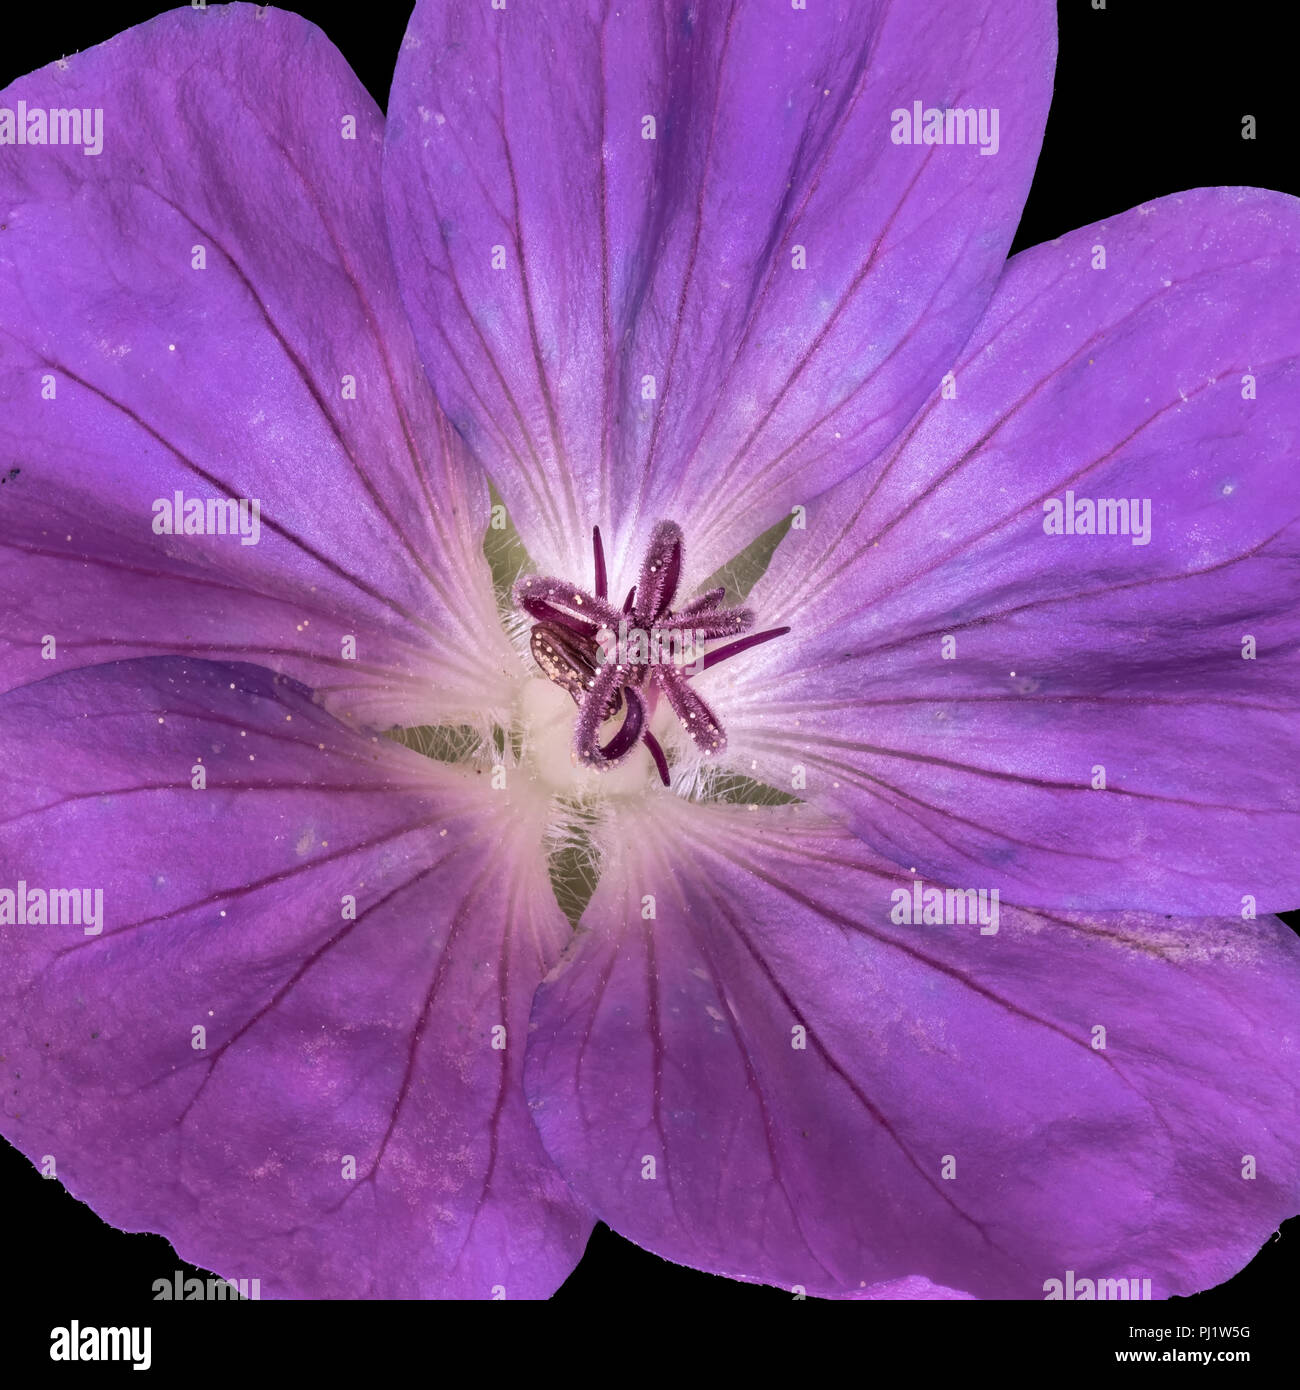 Fine art still life color floral image of the inner of a single isolated wide open violet blooming female geranium / cranesbill flower on black Stock Photo